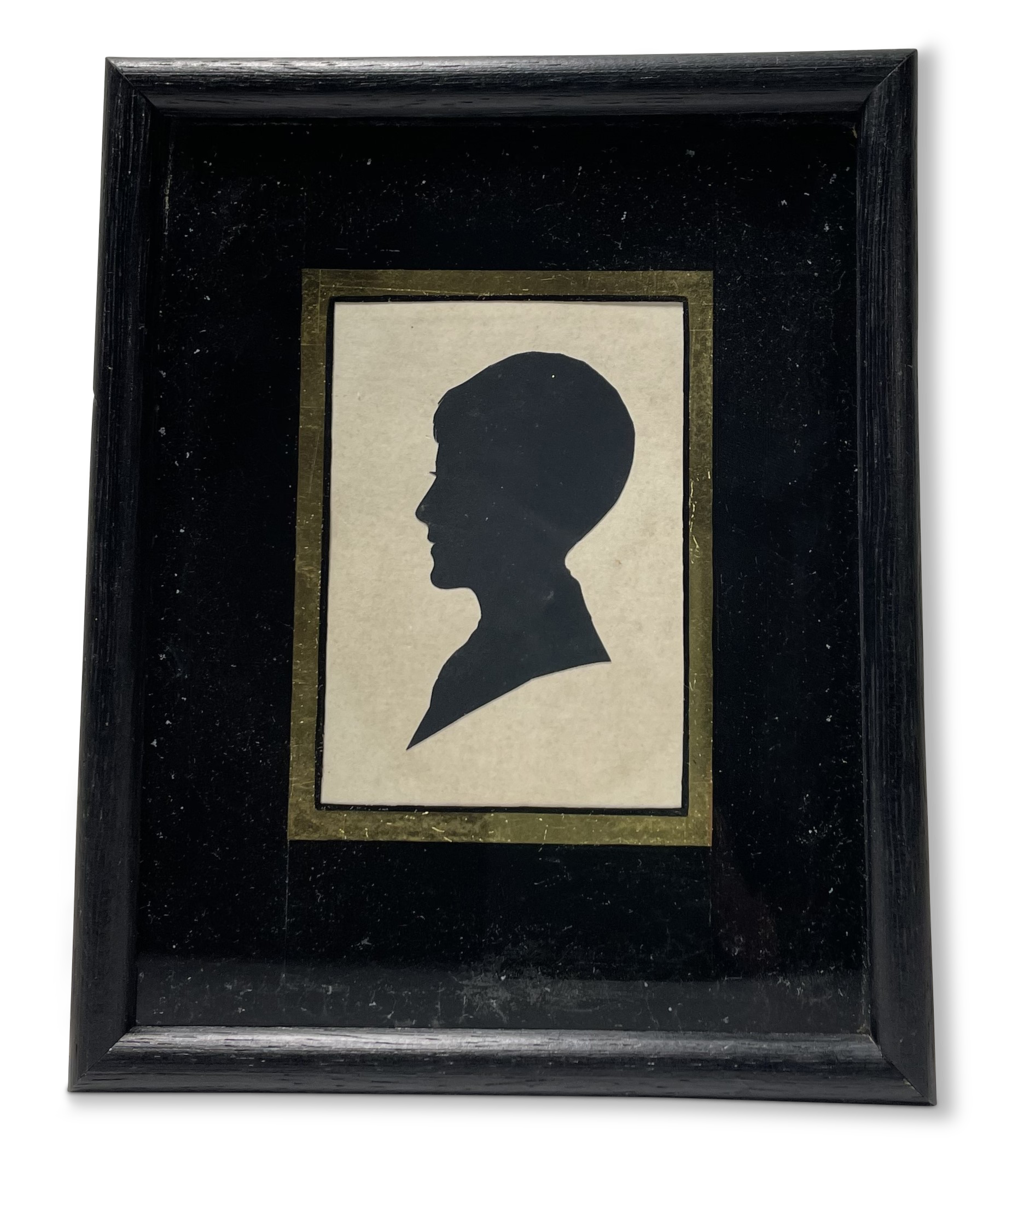 Silhouette Portrait of a Boy Mounted behind Glass in a Square Ebonsied Frame